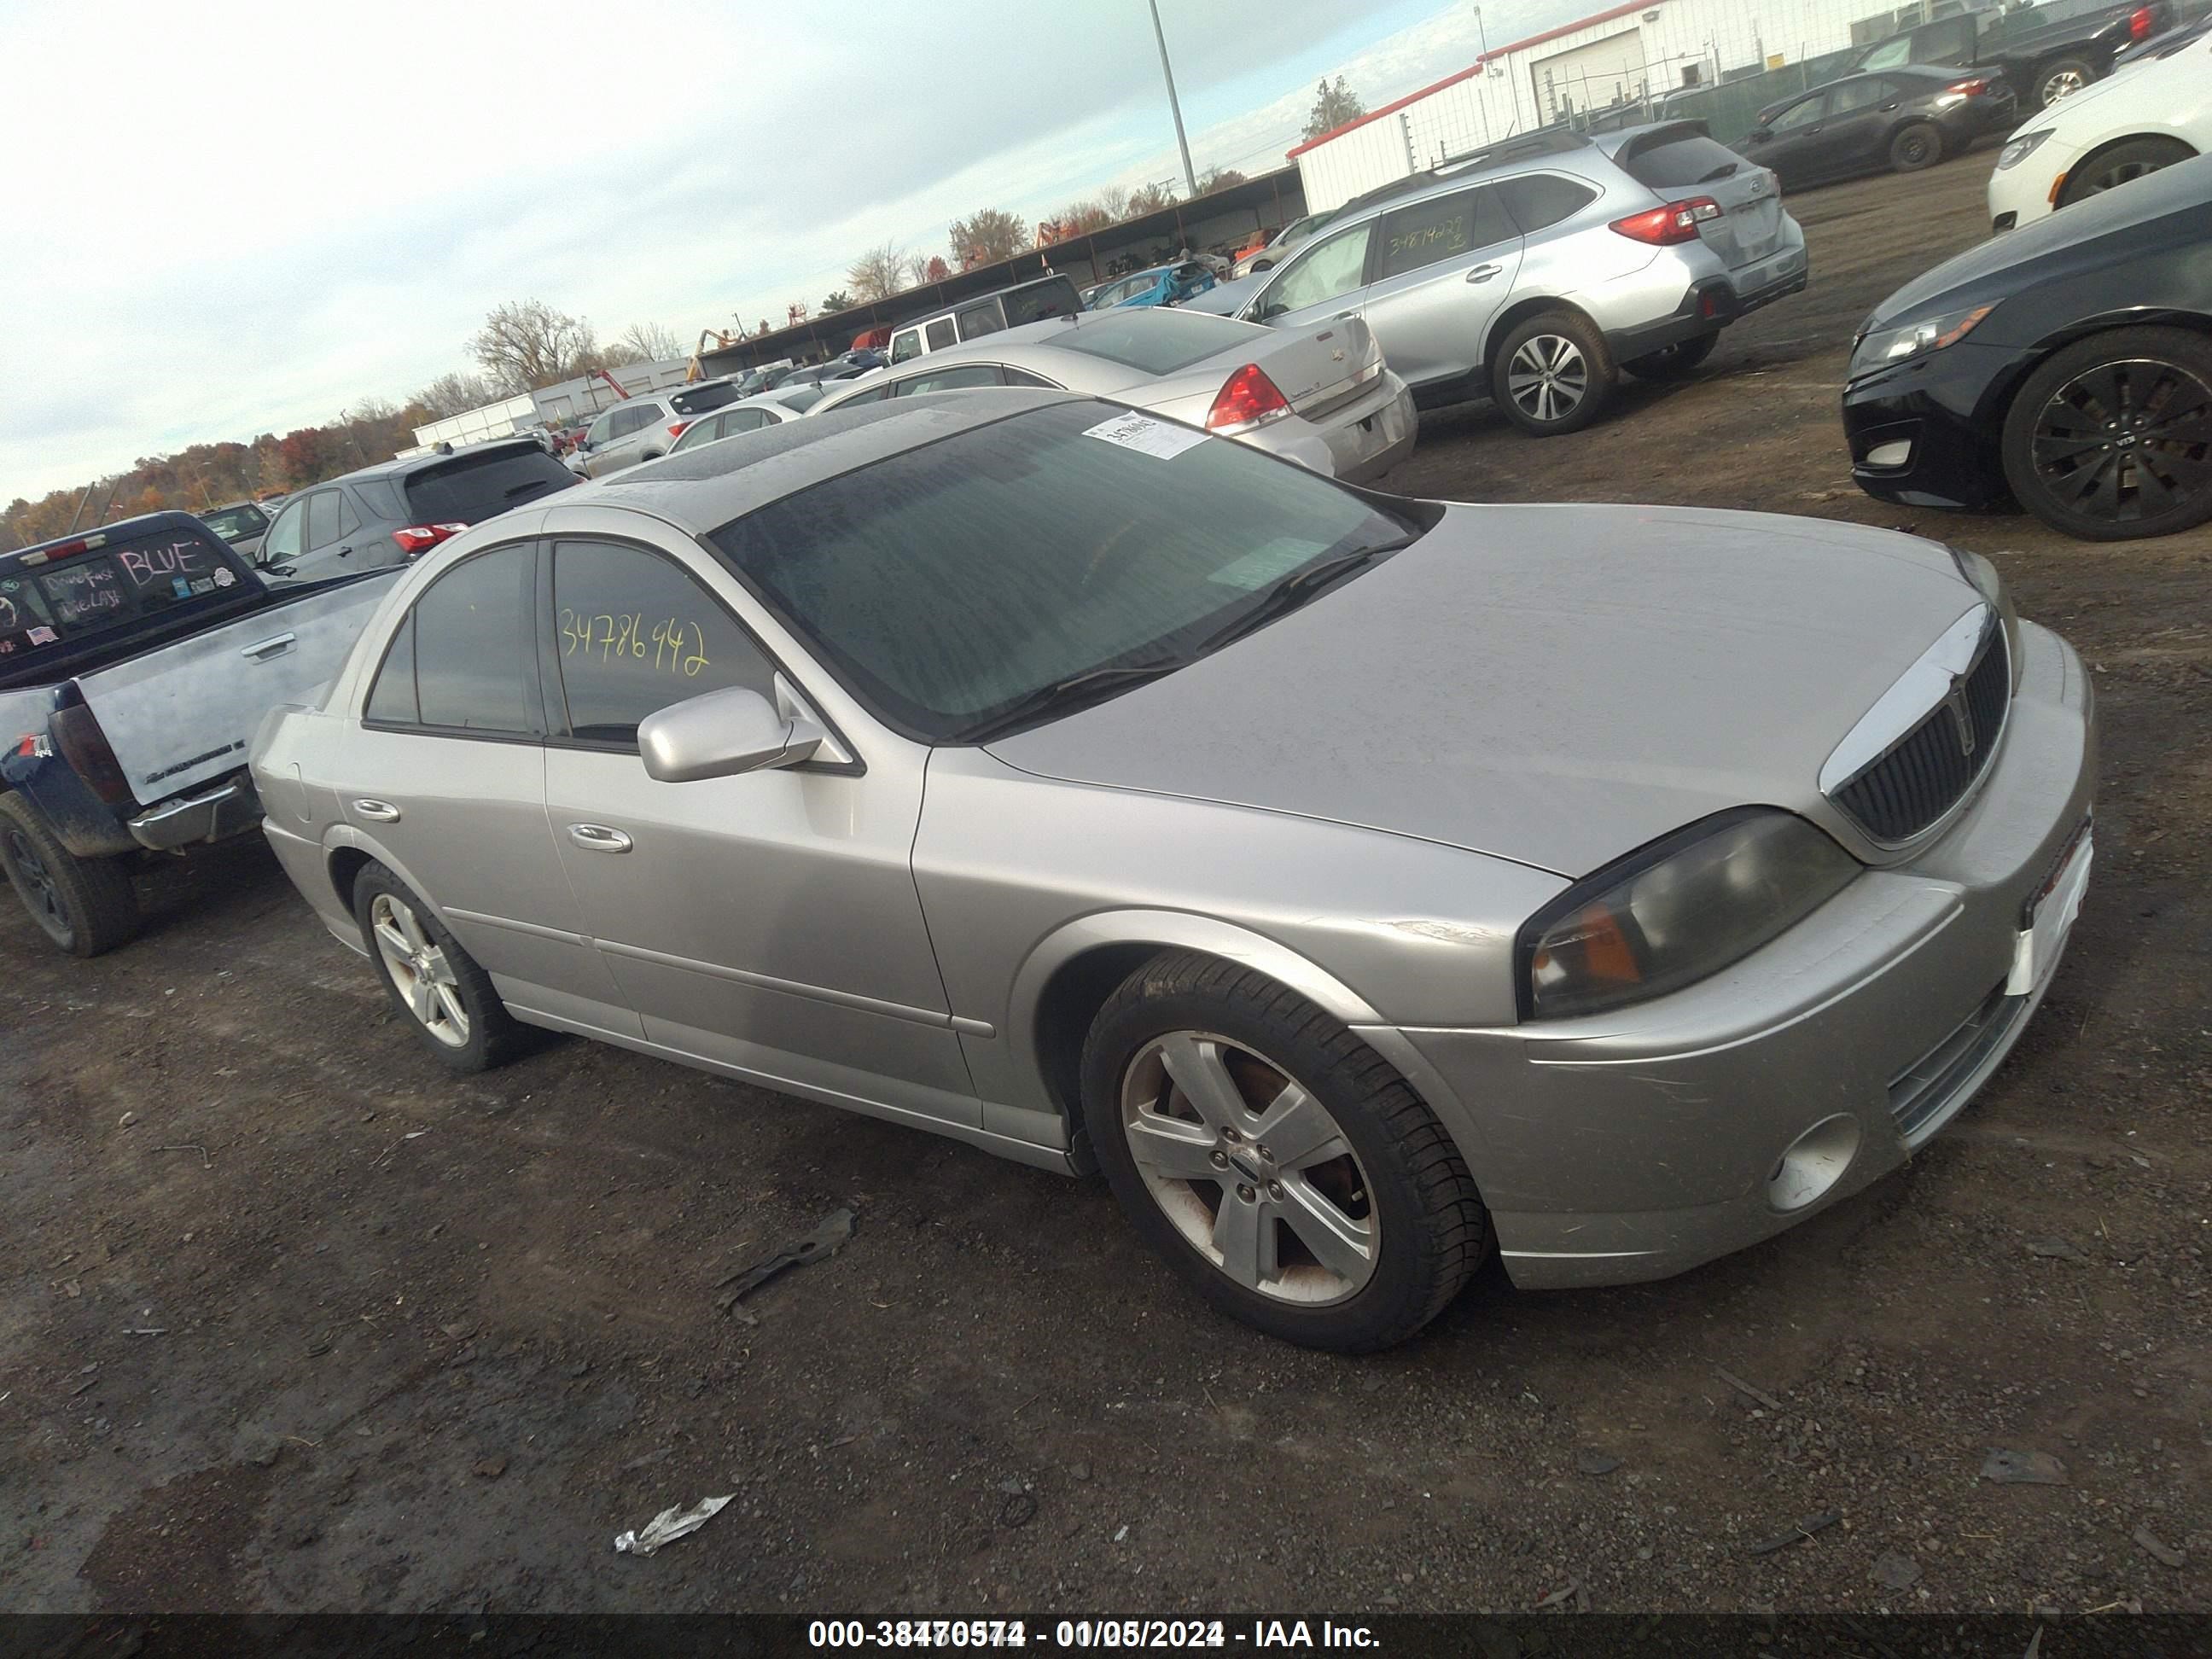 vin: 1LNFM87A36Y641130 1LNFM87A36Y641130 2006 lincoln ls 3900 for Sale in 43123, 1601 Thrallkill Road, Grove City, USA